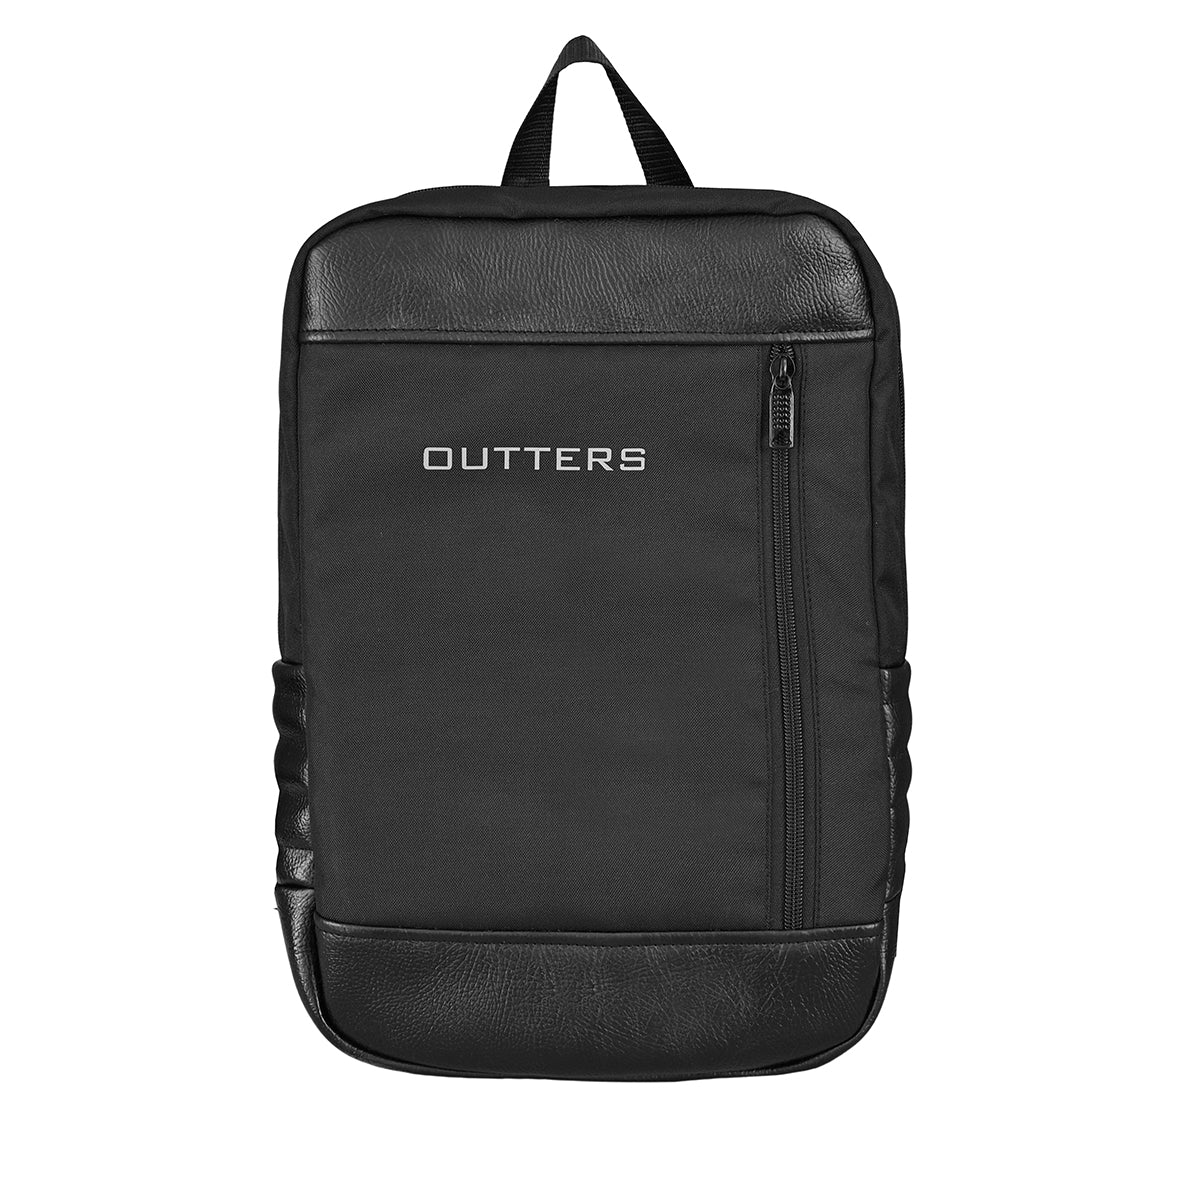 Outters Laptop Travel Laptops Backpack Water Resistant Bag for Women & Men Fits 15.6 Inch Laptop and Notebook